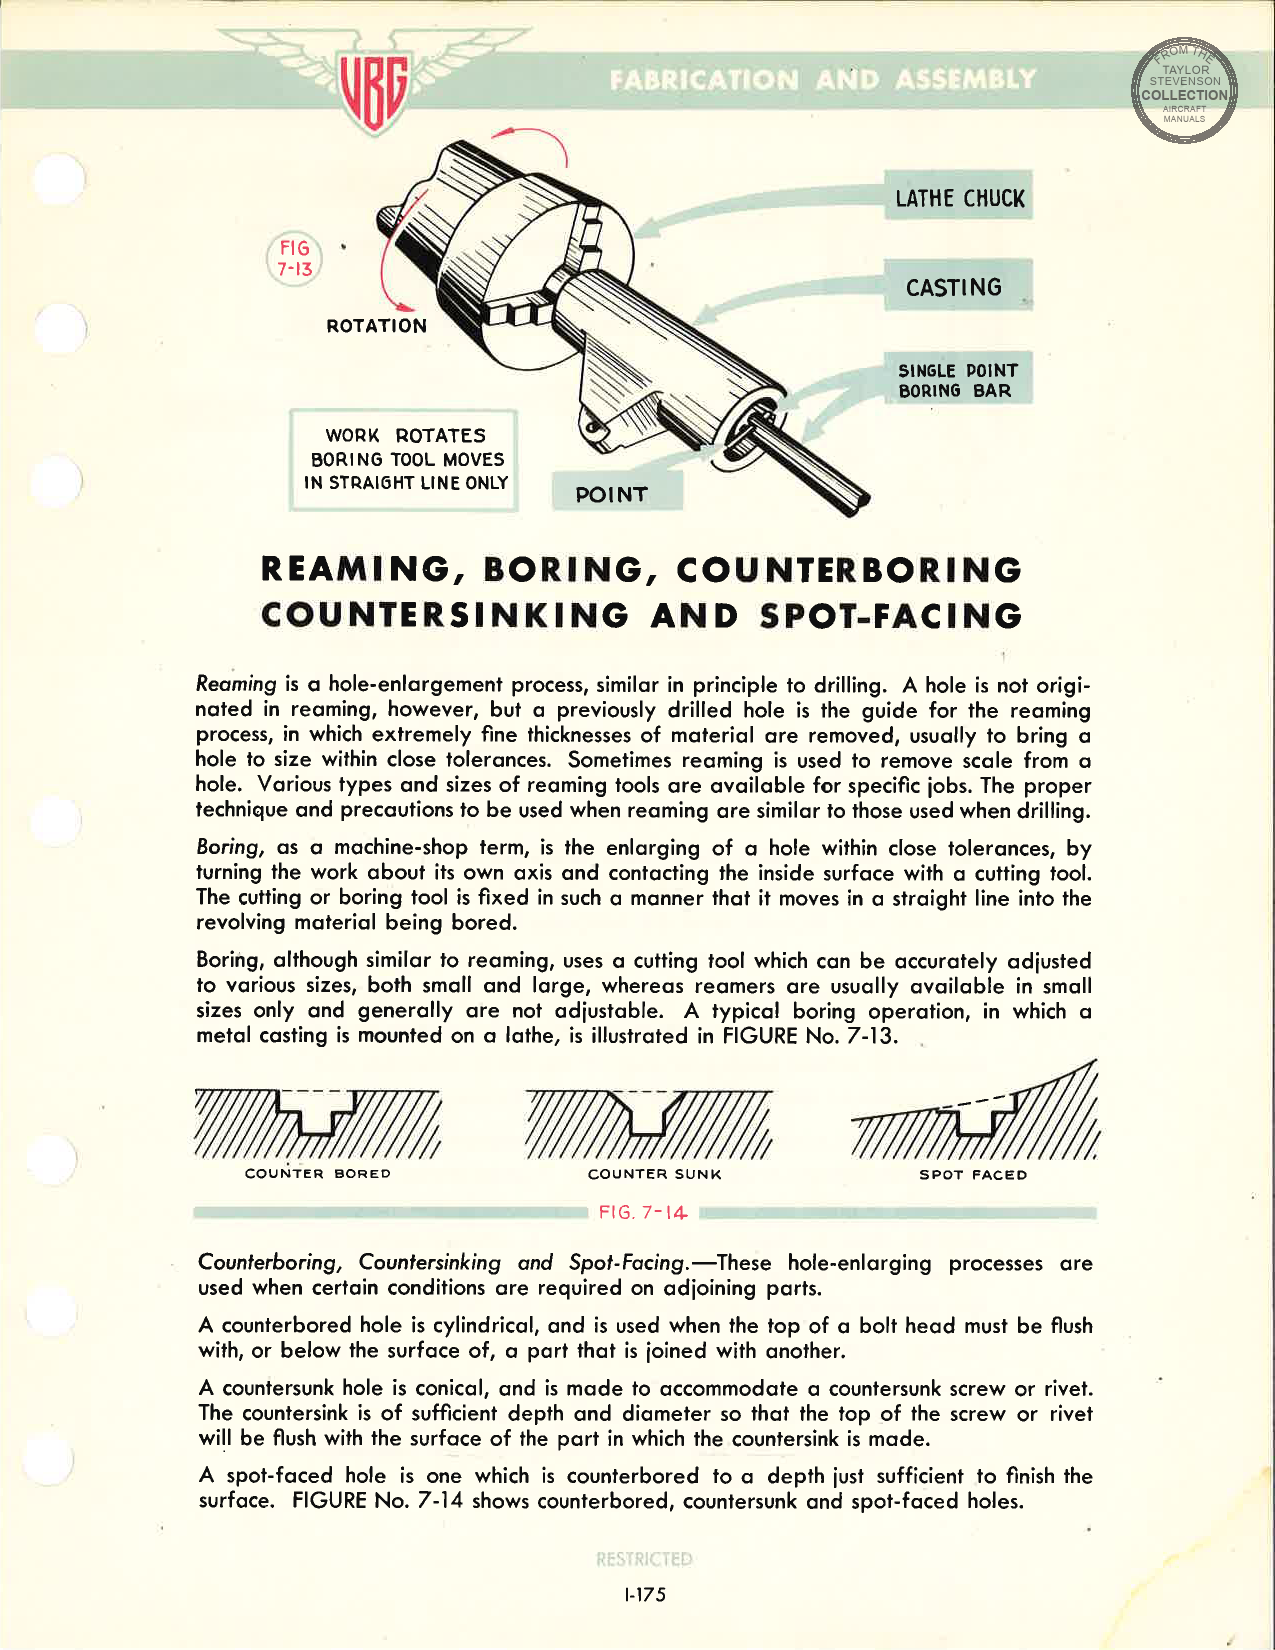 Sample page 151 from AirCorps Library document: Vought Brewster Goodyear Standard Handbook